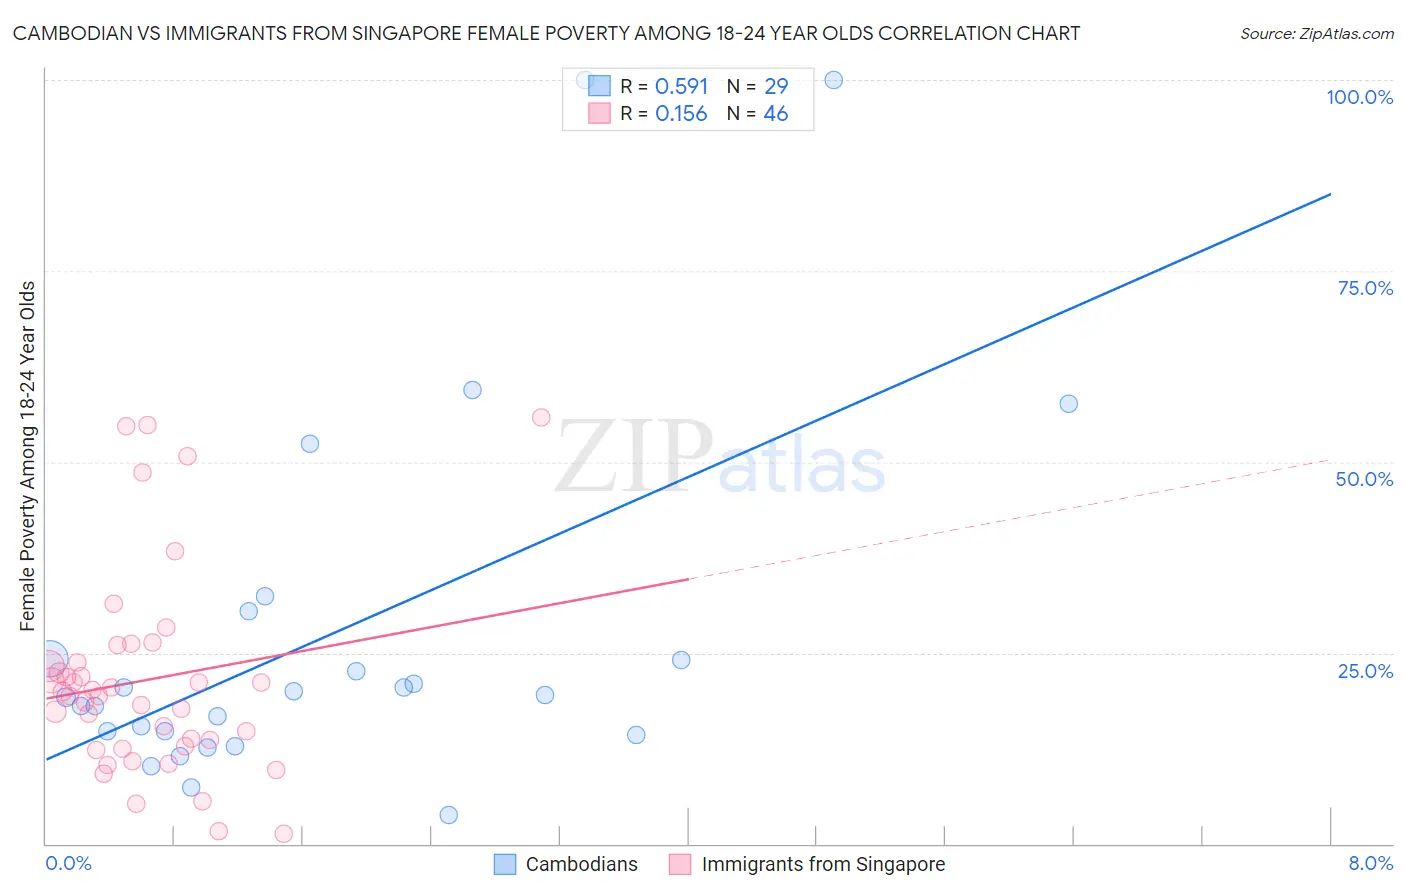 Cambodian vs Immigrants from Singapore Female Poverty Among 18-24 Year Olds